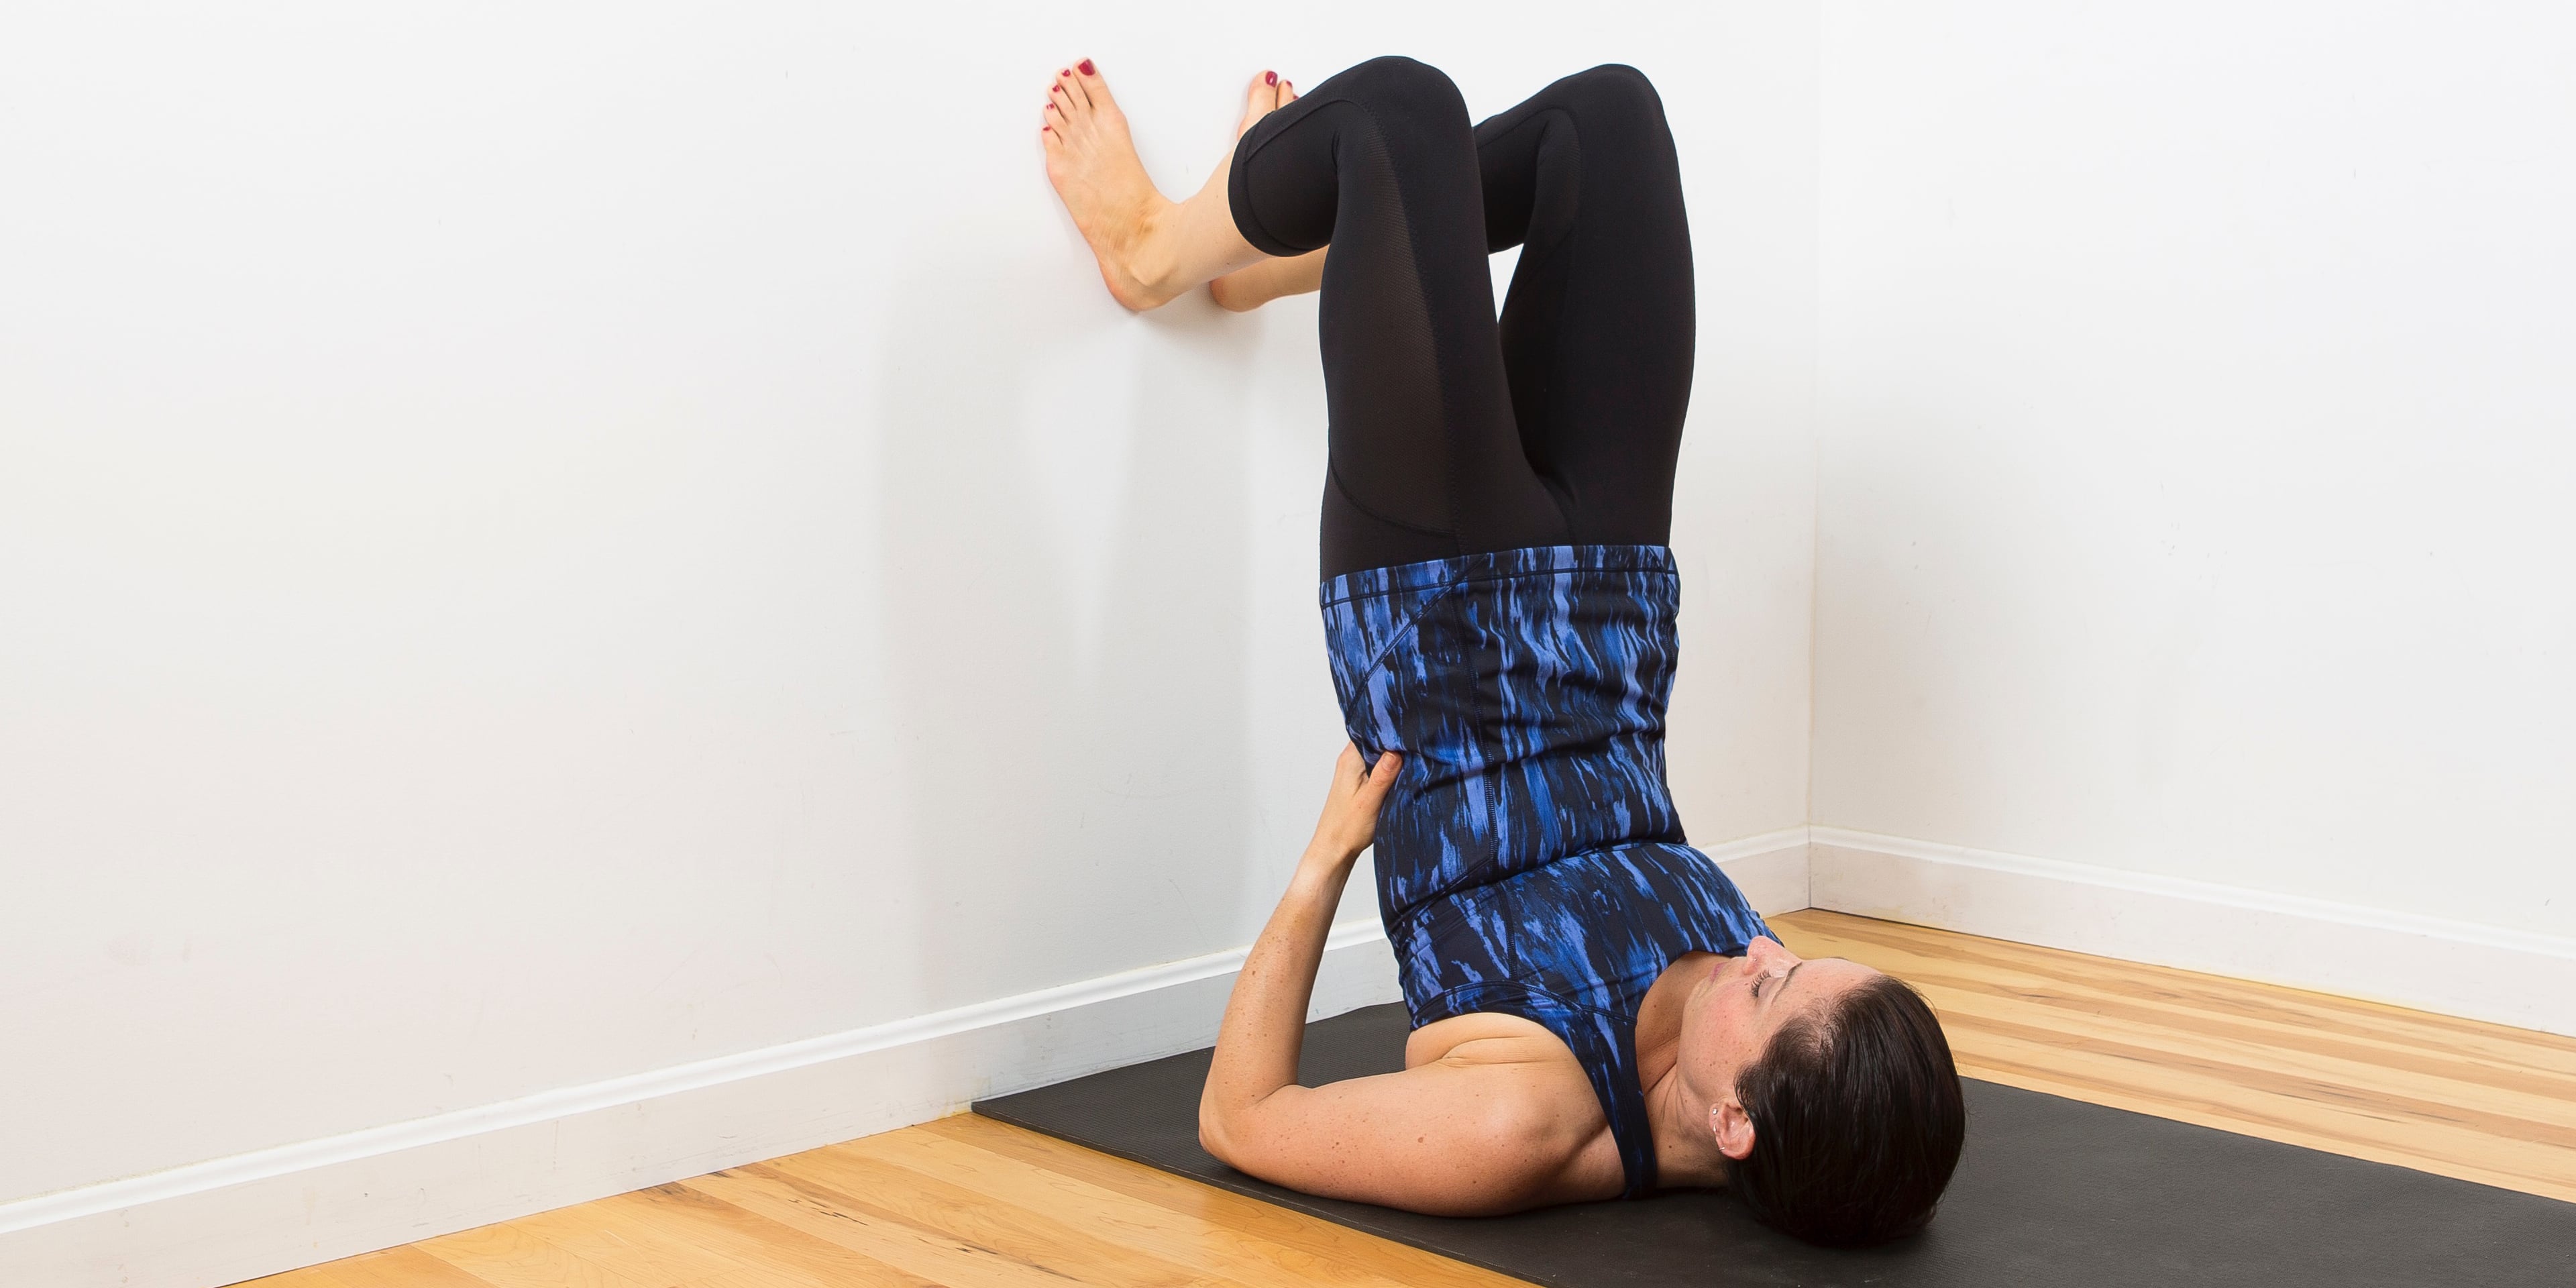 How to Stretch the Upper Back Using a Wall | POPSUGAR Fitness